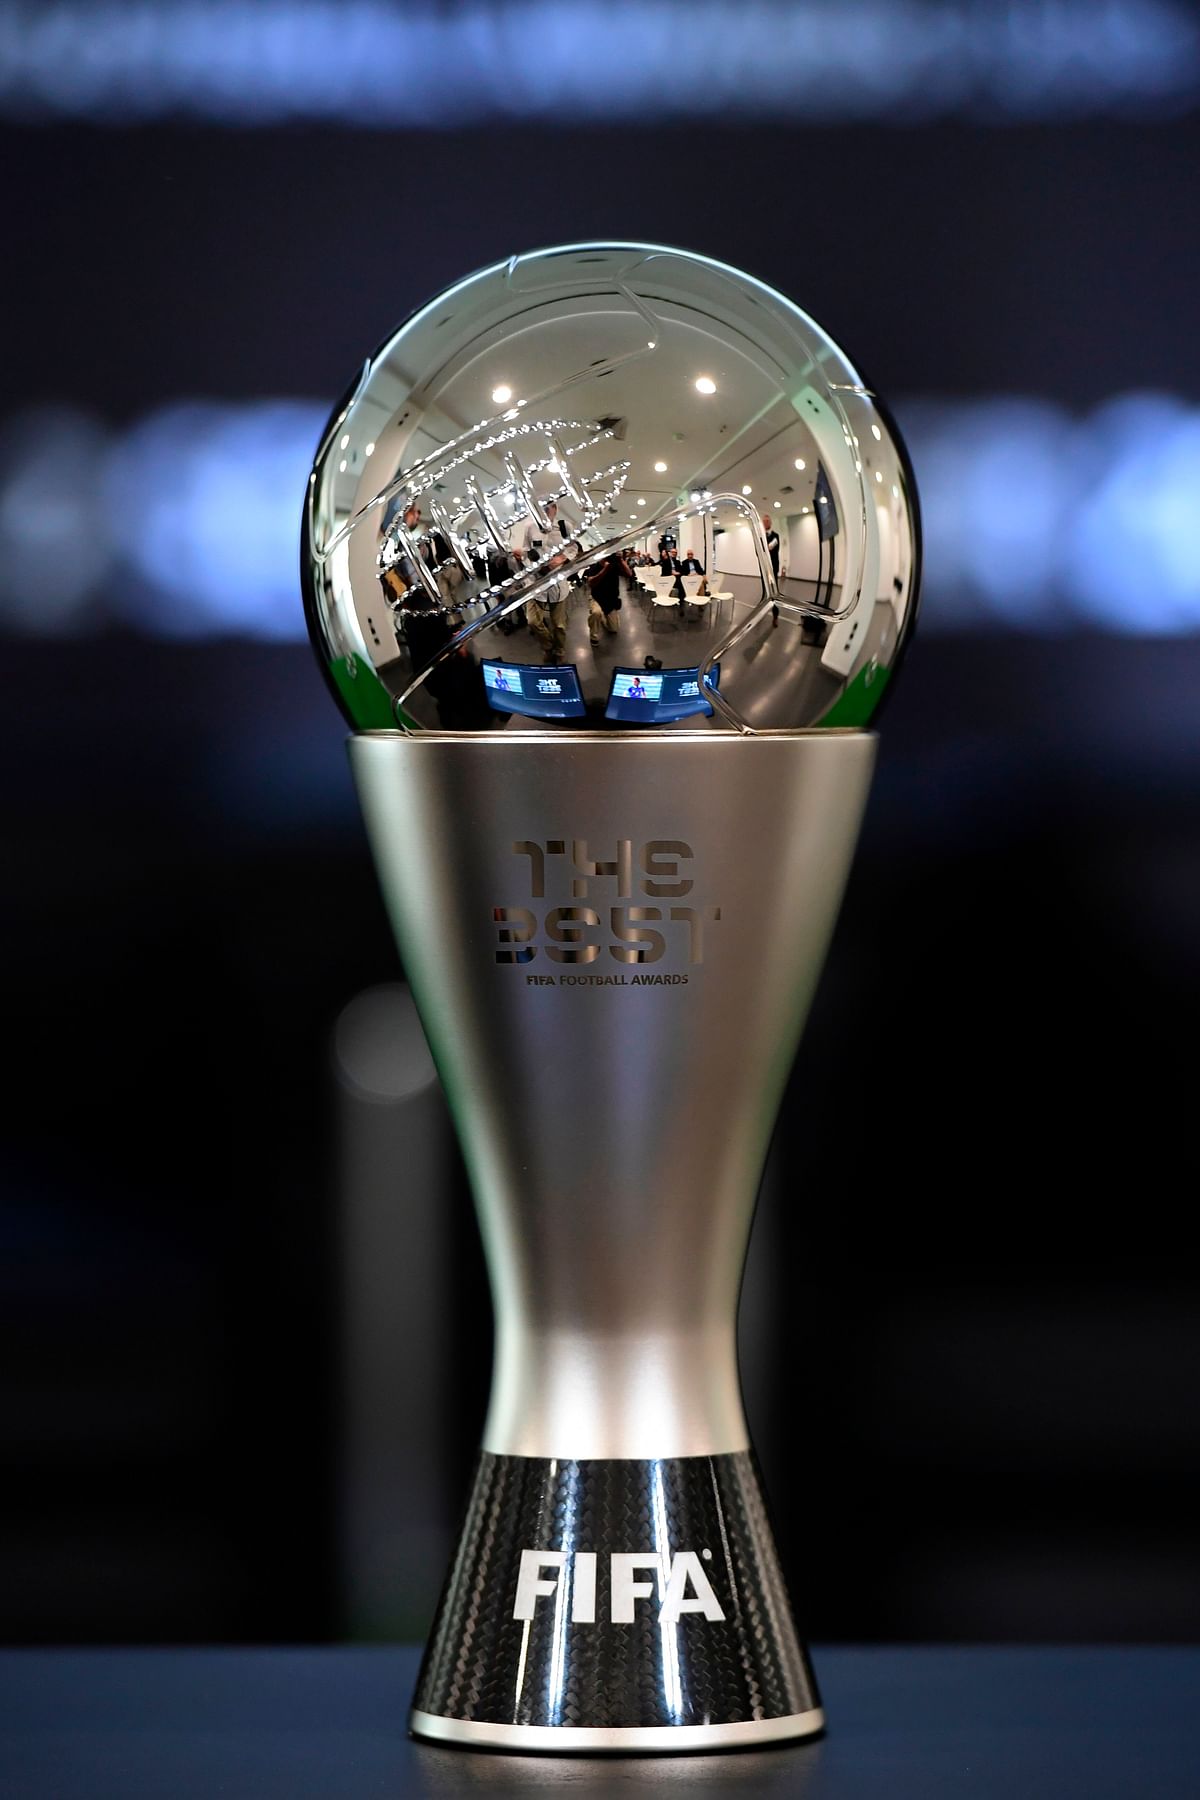 The Best Fifa Football Award cup is pictured prior to a press conference unveiling the finalists for the upcoming The Best Fifa Football Awards, on Monday. Photo: AFP